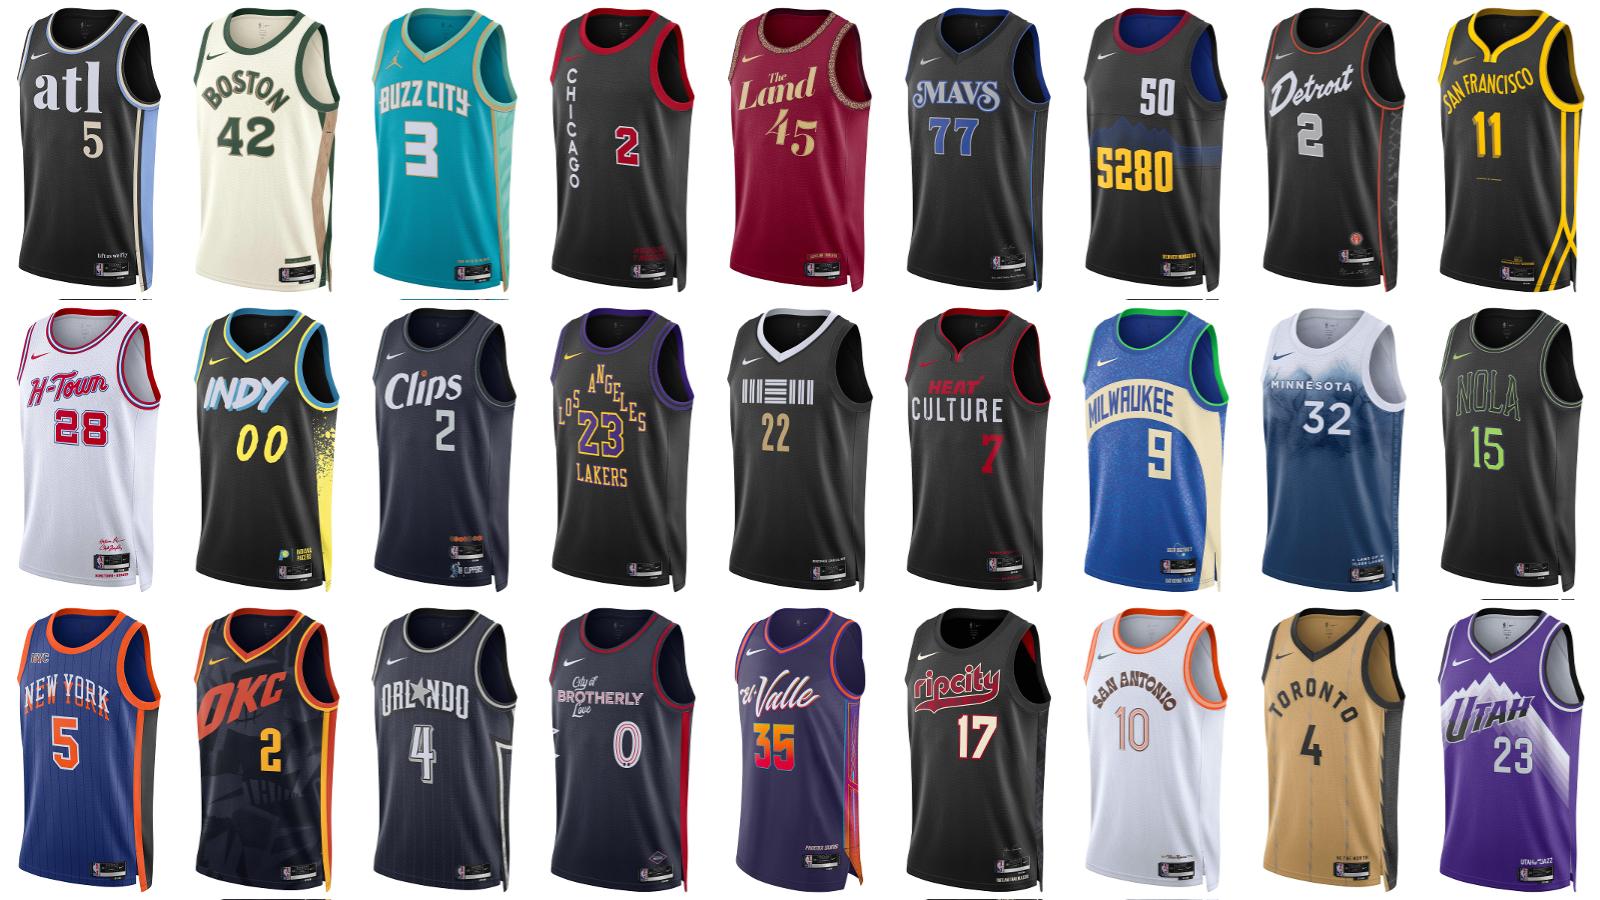 Cheap City Edition Los Angeles Clippers Kawhi Leonard Basketball Jerseys -  China Kyrie Irving Durant T-Shirts and MVP Giannis Antetokounmpo Uniforms  price